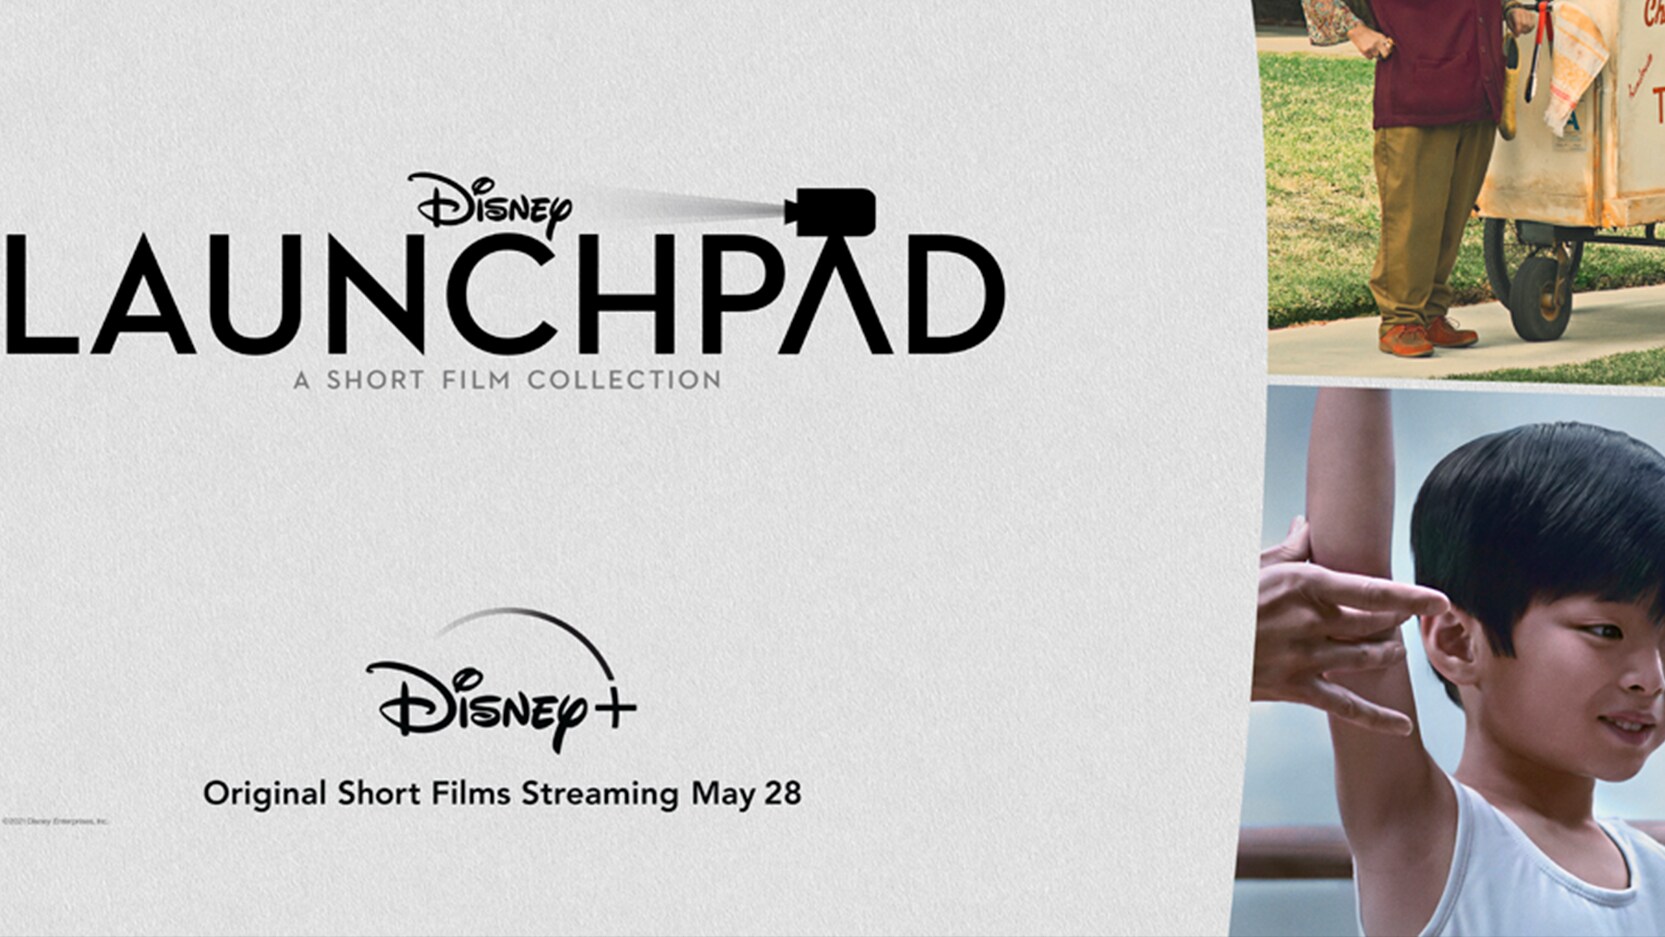 Disney+ Releases Trailers For All Six Of Disney's "Launchpad" Season One Short Films